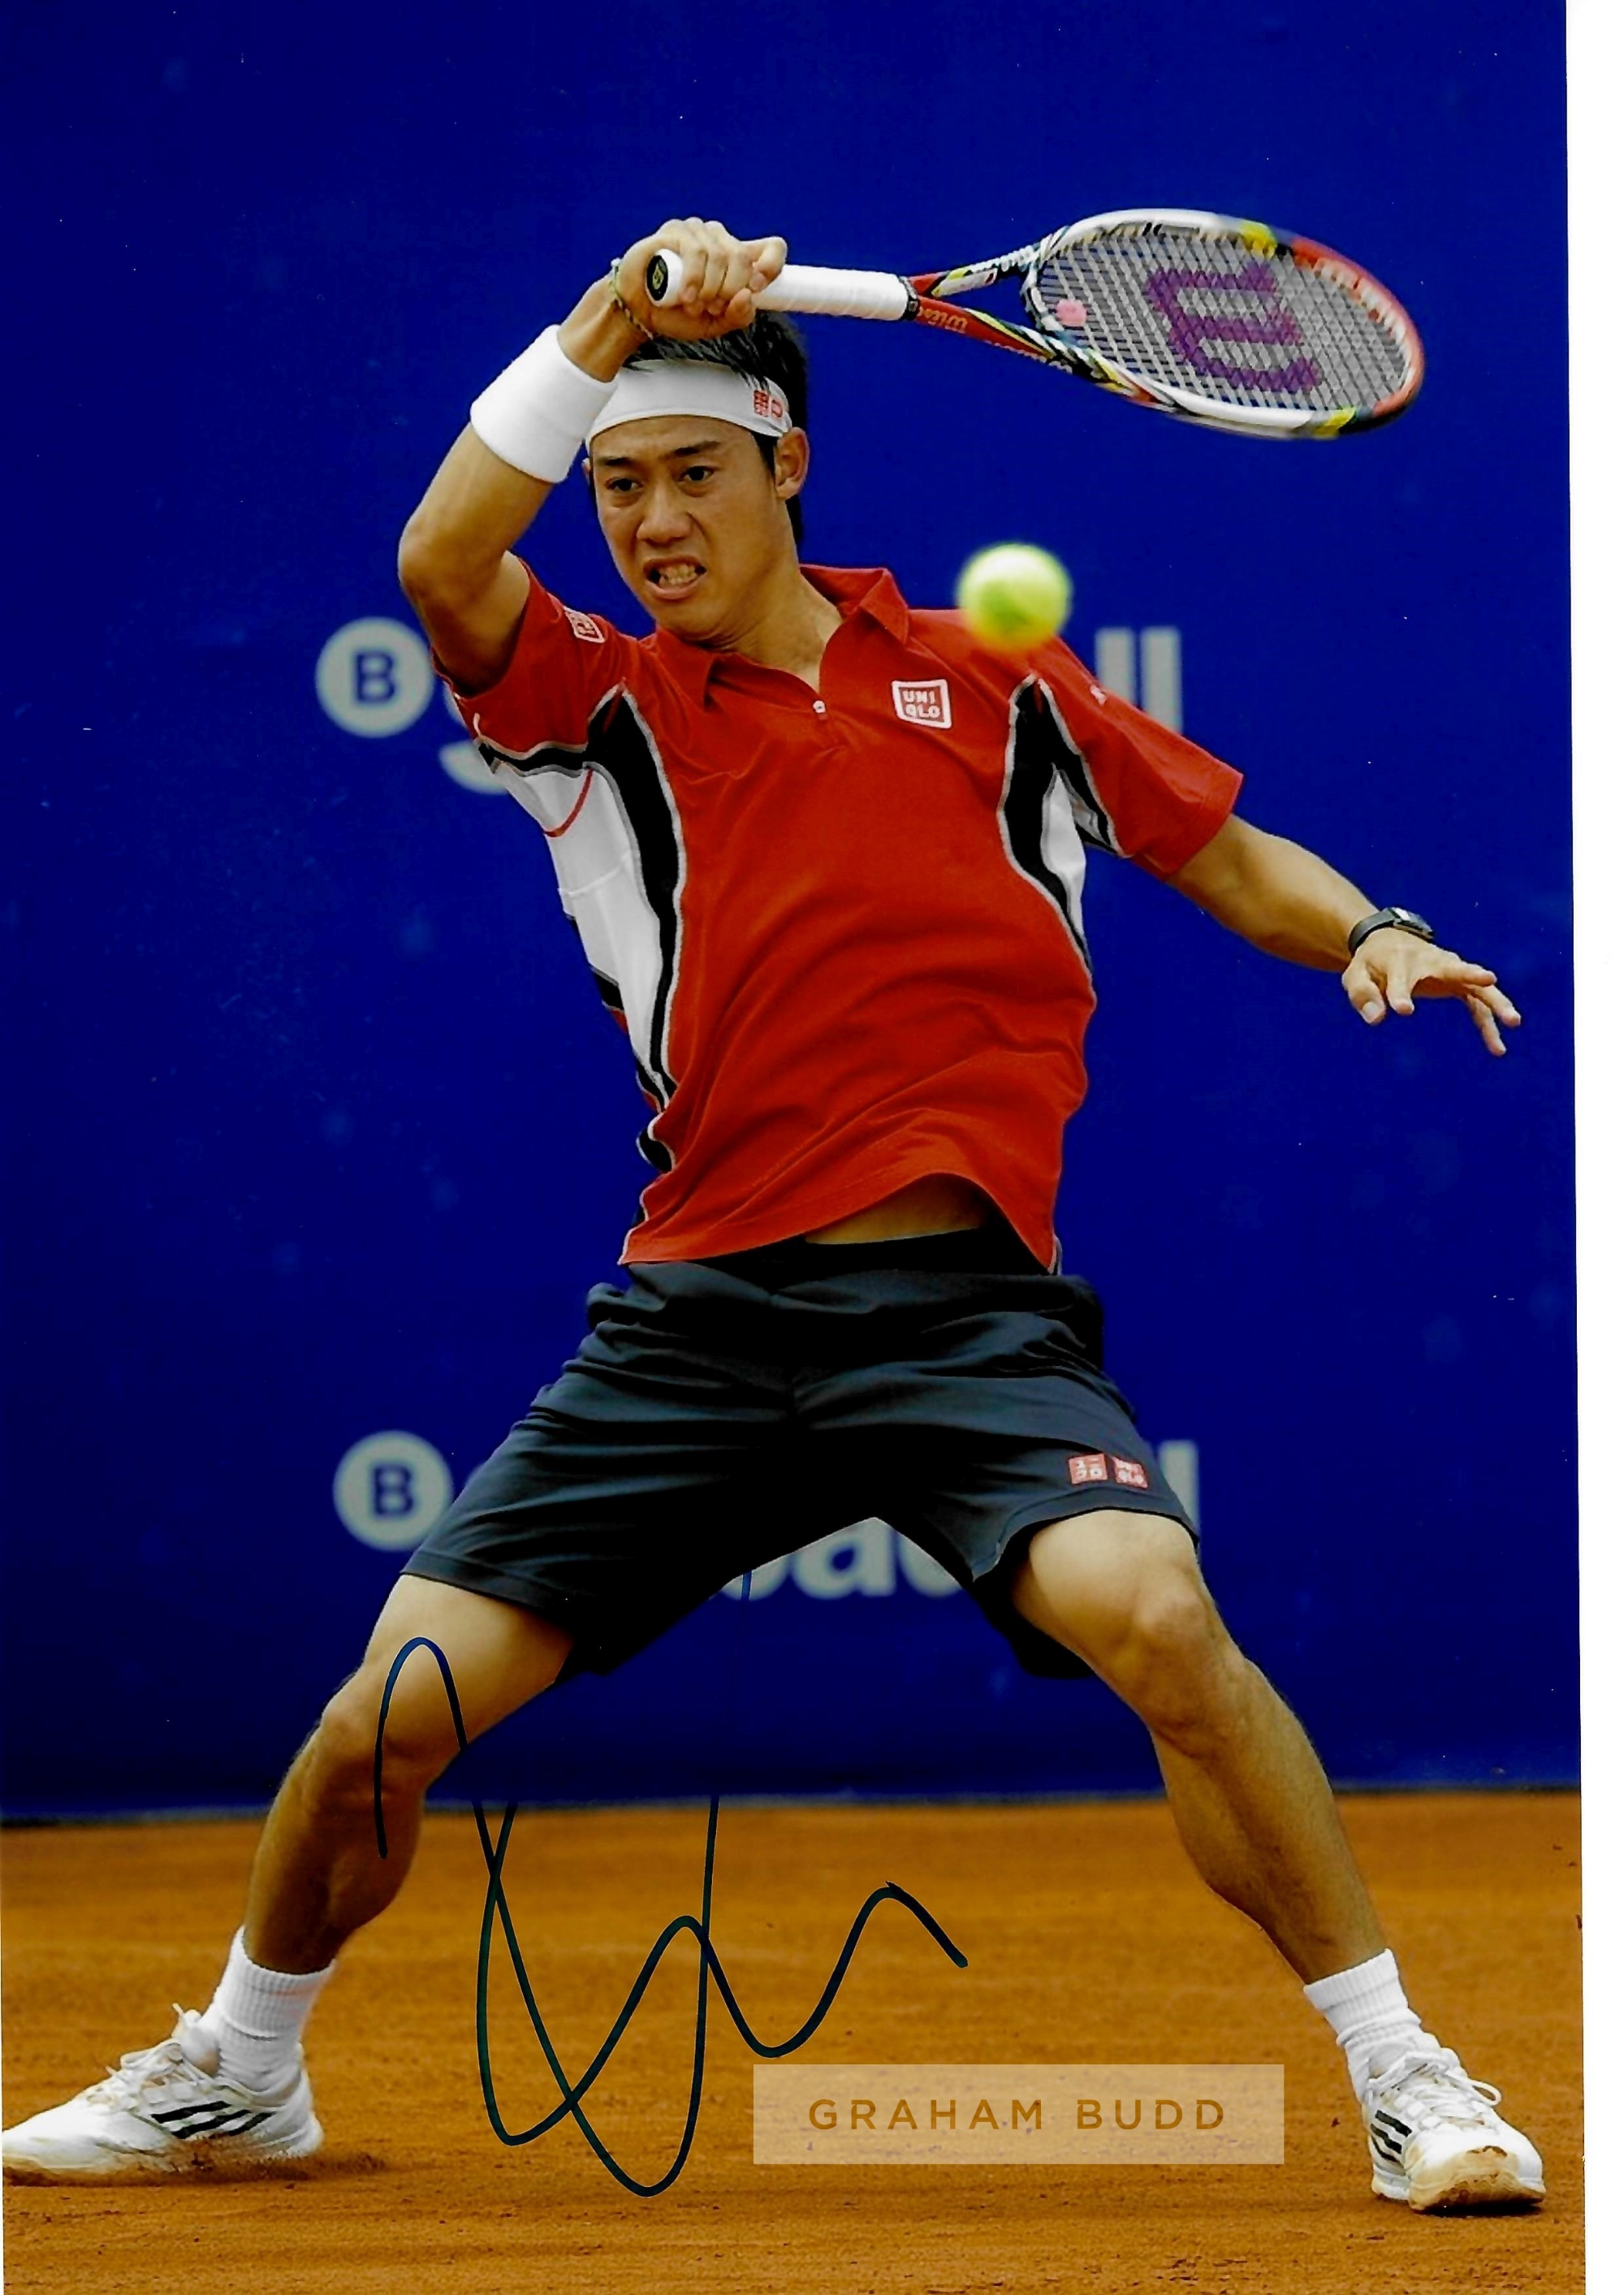 Collection of 11 signed photograph of tennis players from the men's game, including Roger Federer ( - Image 10 of 11